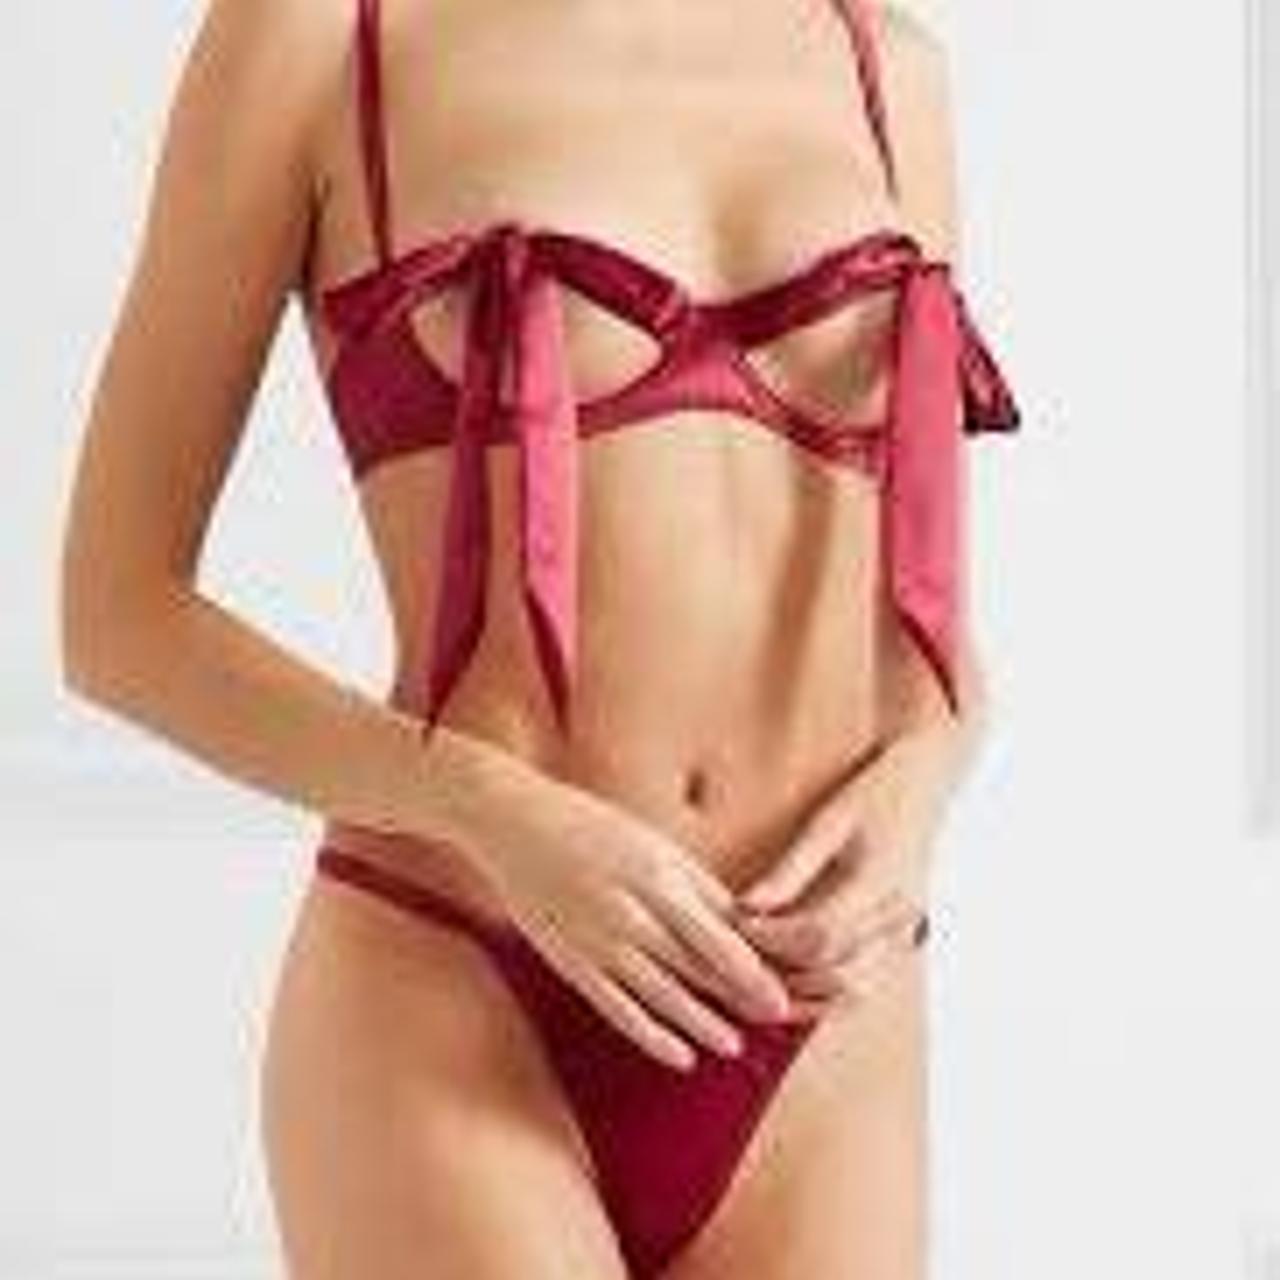 Agent Provocateur Women's Burgundy and Red Nightwear (2)